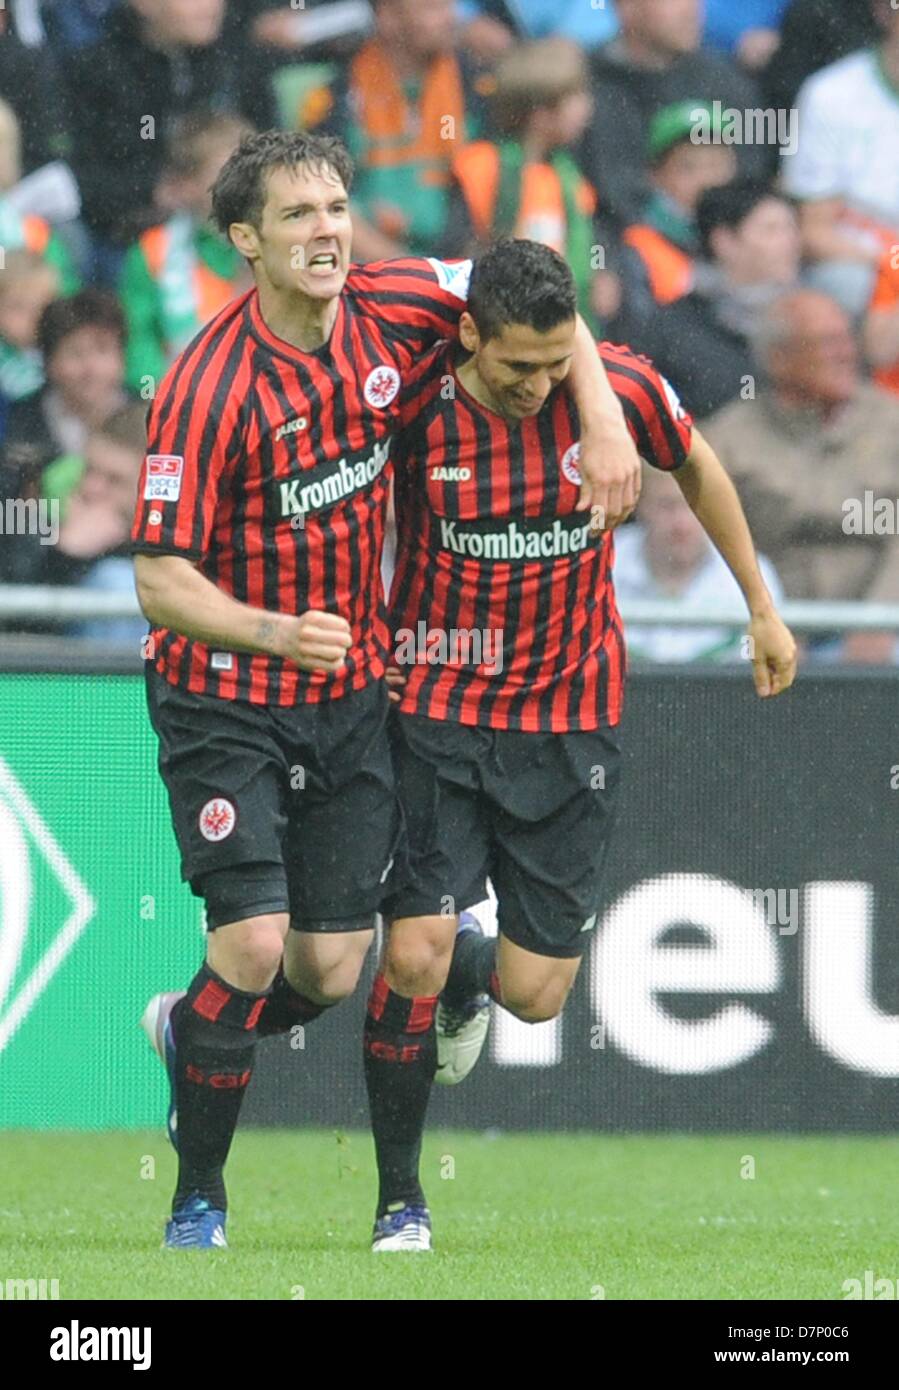 Frankfurt's Srdjan Lakic (L) celebrates his 1-1 equalizer with Karim Matmour during the German Bundesliga match between Werder Bremen and Eintracht Frankfurt at Weser Stadium in Bremen, Germany, 11 May 2013. Photo: CARMEN JASPERSEN (ATTENTION: EMBARGO CONDITIONS! The DFL permits the further utilisation of up to 15 pictures only (no sequntial pictures or video-similar series of pictures allowed) via the internet and online media during the match (including halftime), taken from inside the stadium and/or prior to the start of the match. The DFL permits the unrestricted transmission of digitised  Stock Photo